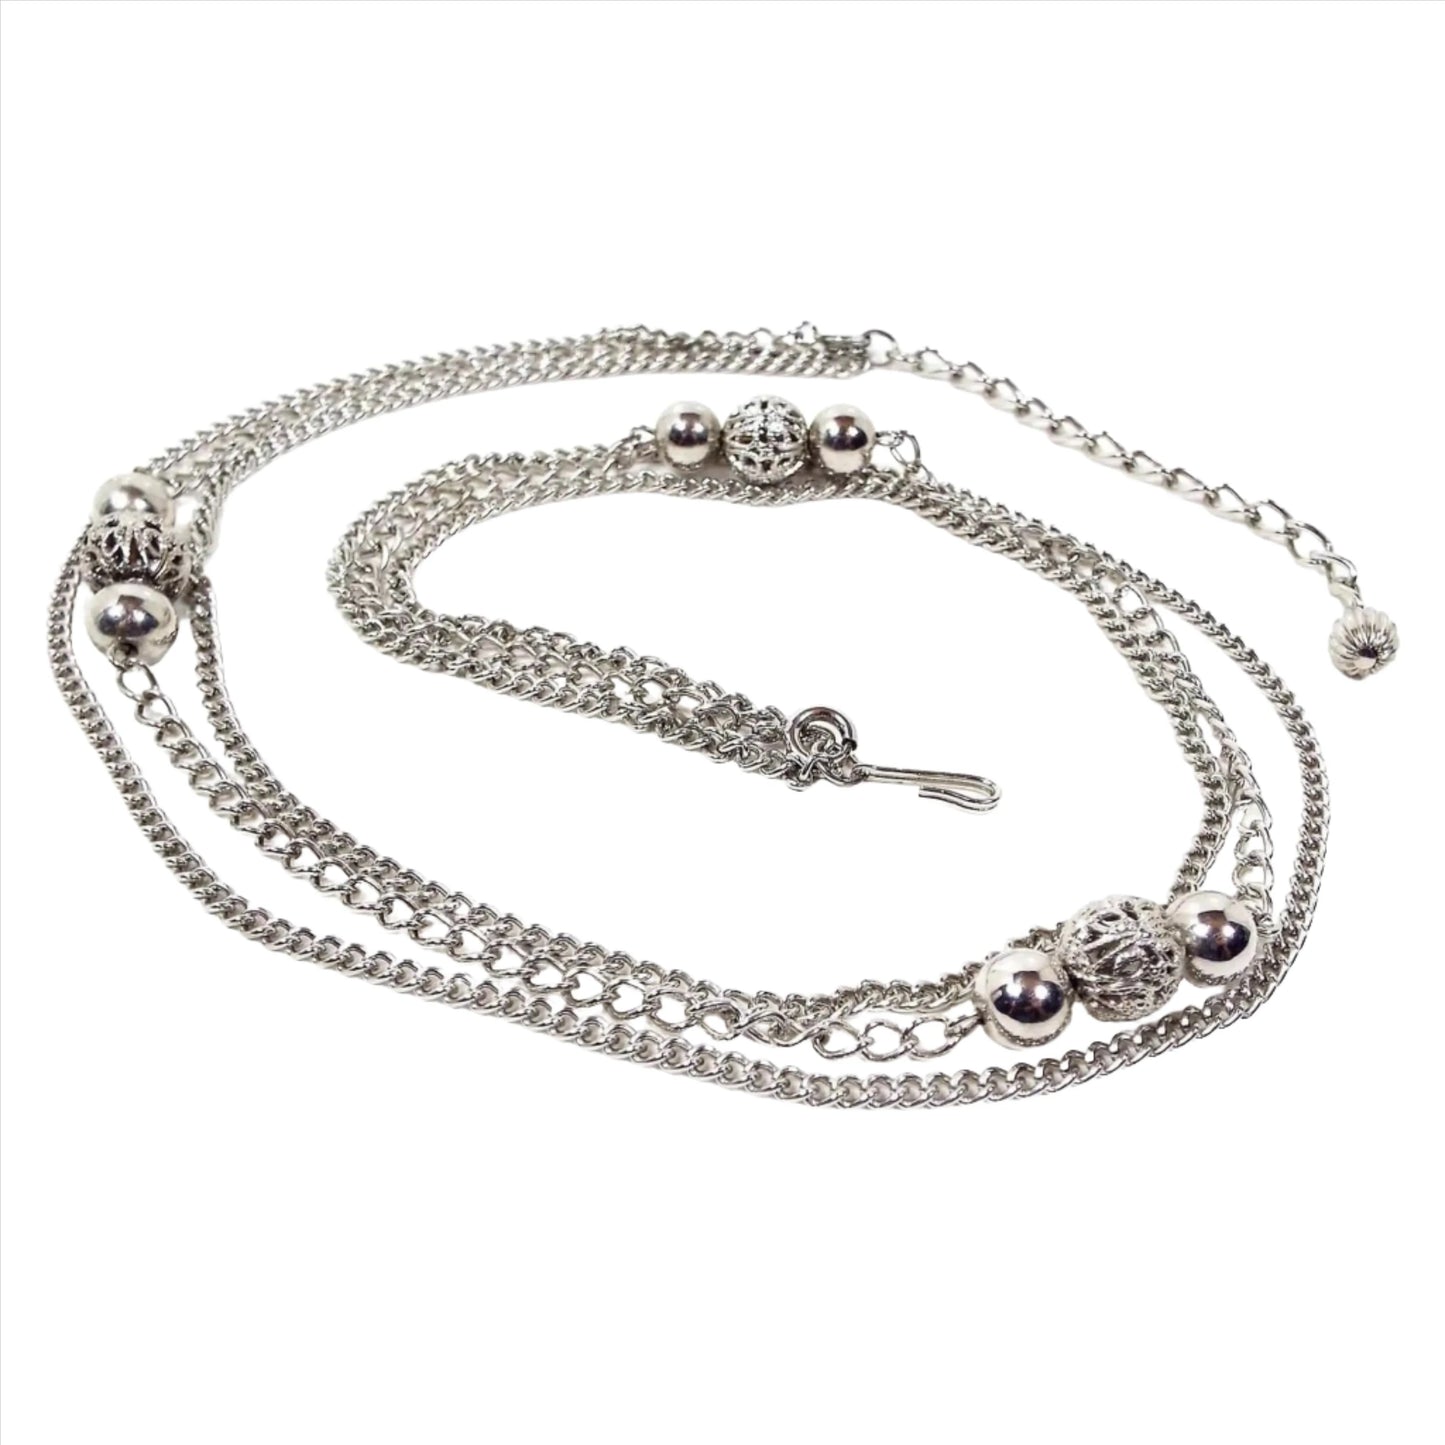 Top view of the retro vintage multi strand silver tone chain necklace. The top and bottom strands have small curb link chain. The middle strand has a wider curb link chain and three sets of metal bead clusters that have shiny round beads with filigree beads in the middle. It has spring ring clasps on the ends of the middle strand so you can remove it if desired. There is a hook clasp at the end. The other end is wider curb links with a corrugated bead at the end so you can adjust length when worn.